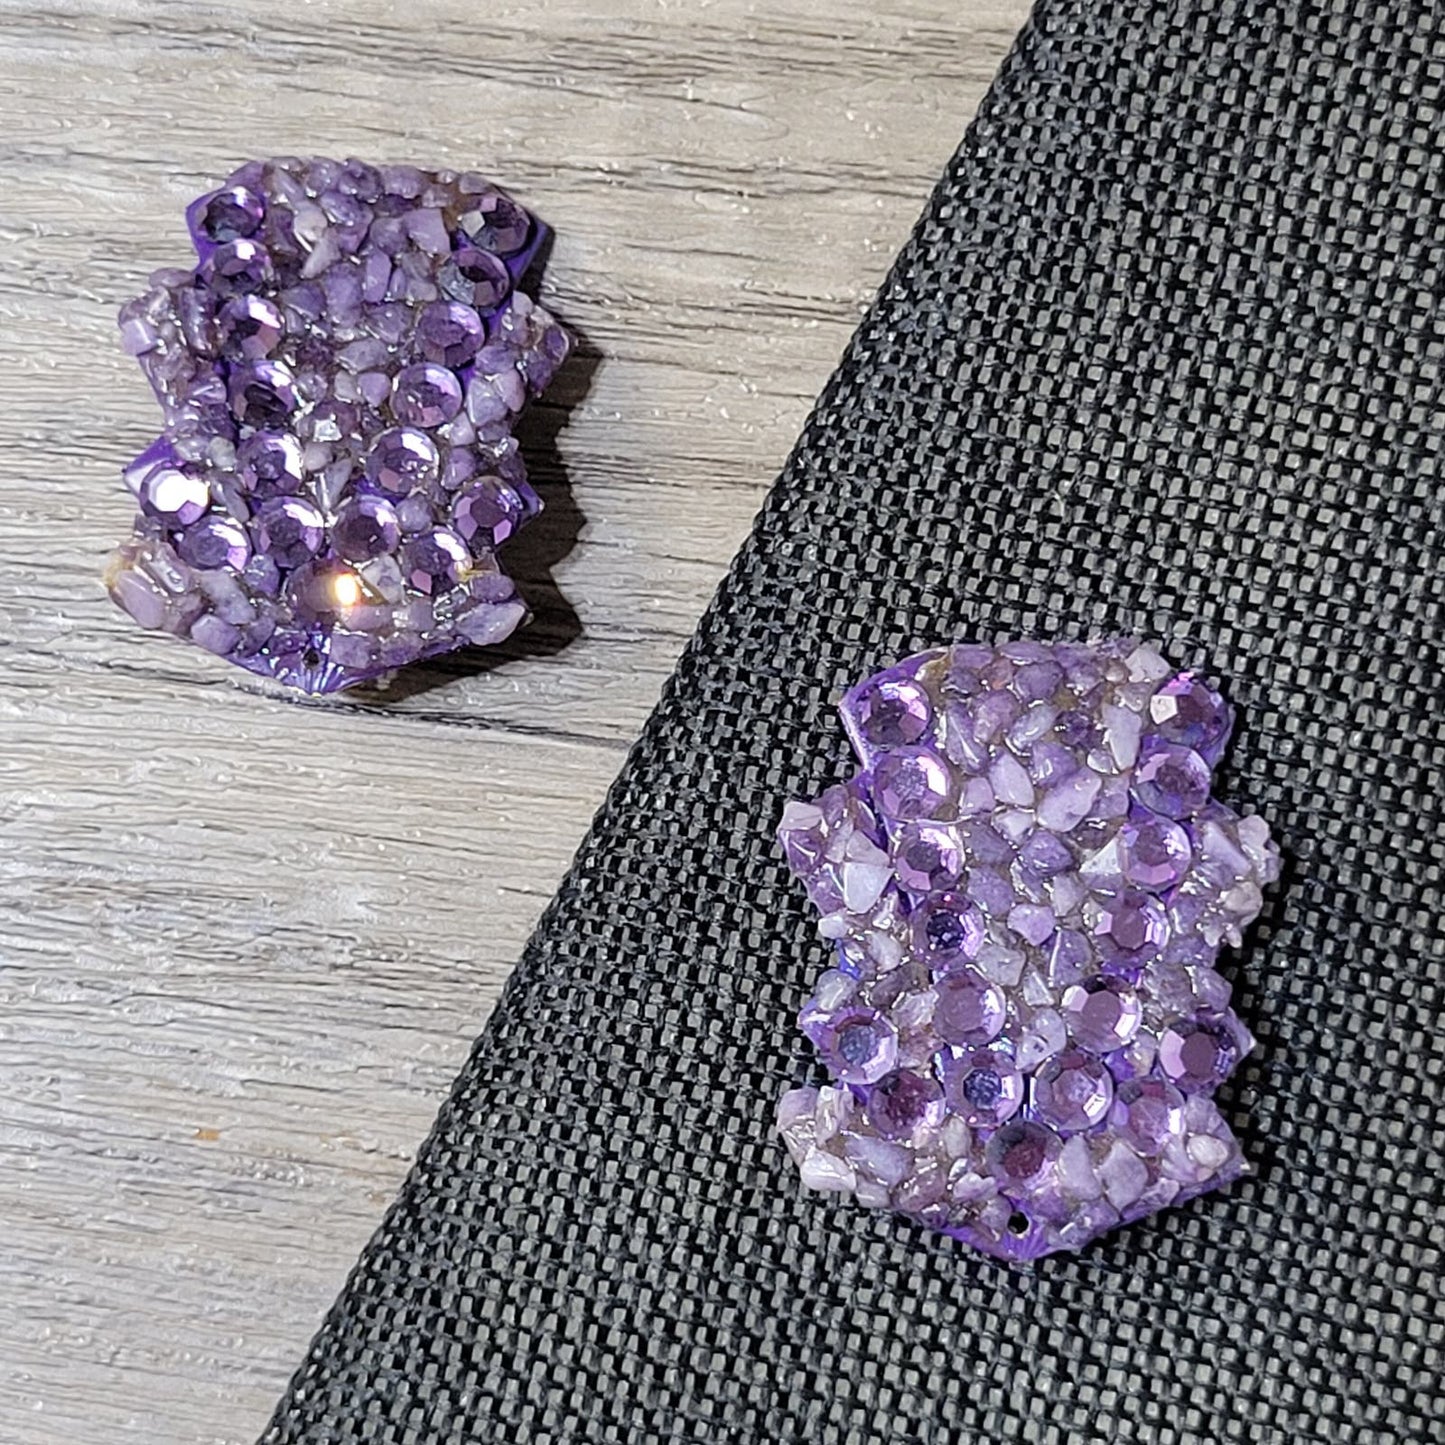 1980s Art Deco revival jeweled pierced earrings, amethyst stone chips and purple acrylic,